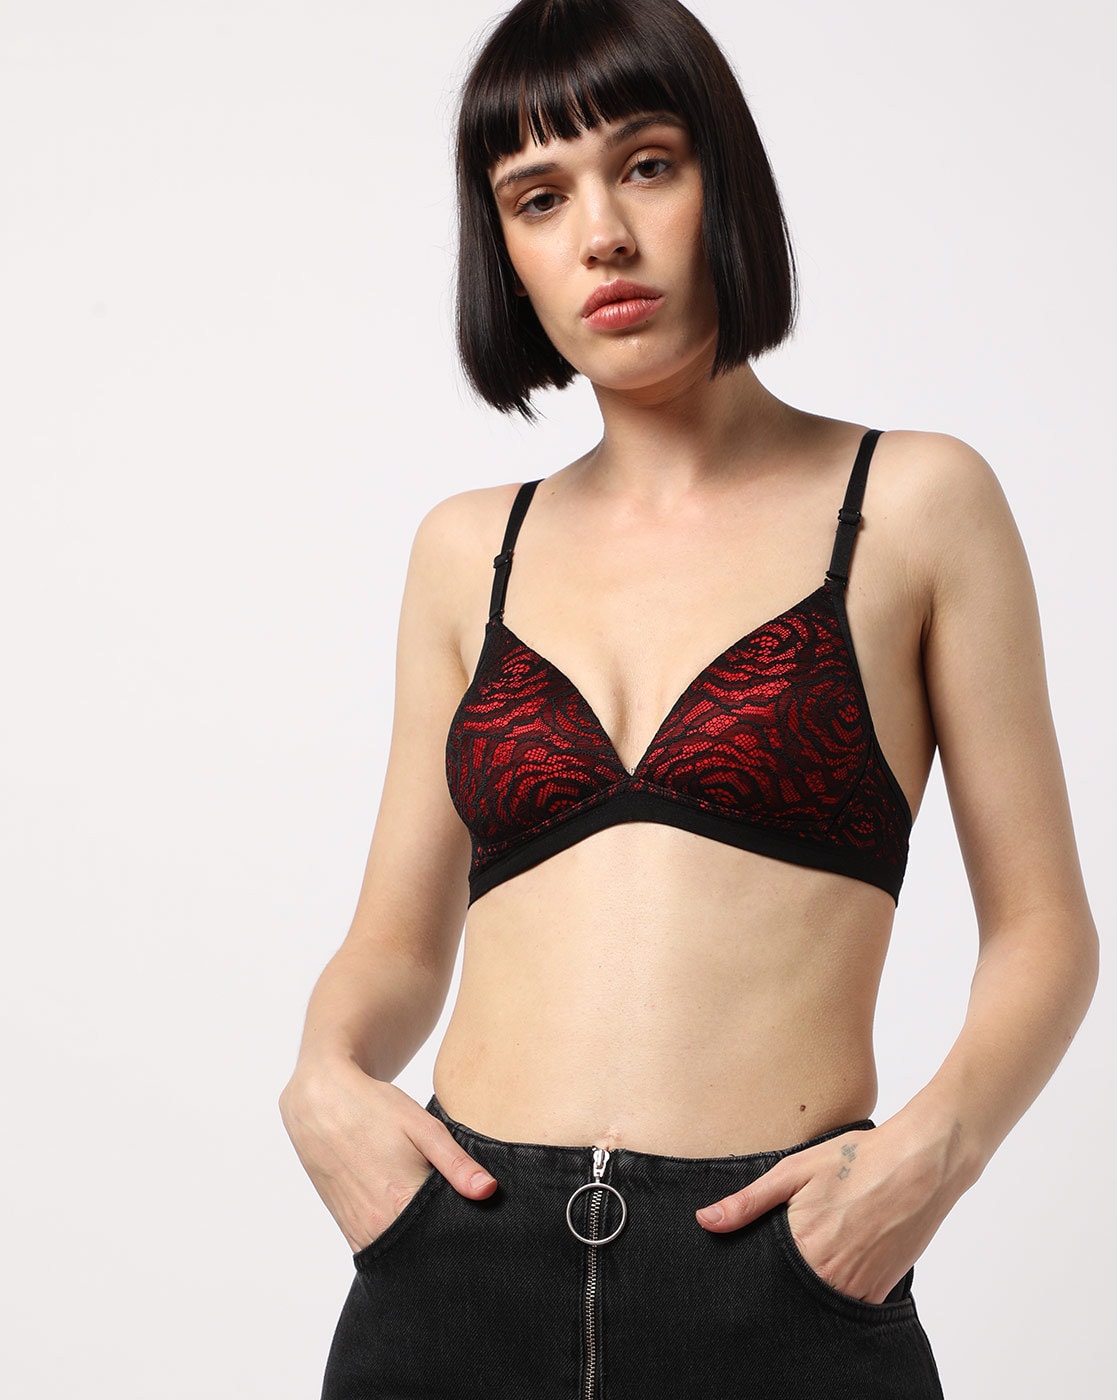 Under-Wired Padded Lace Bra